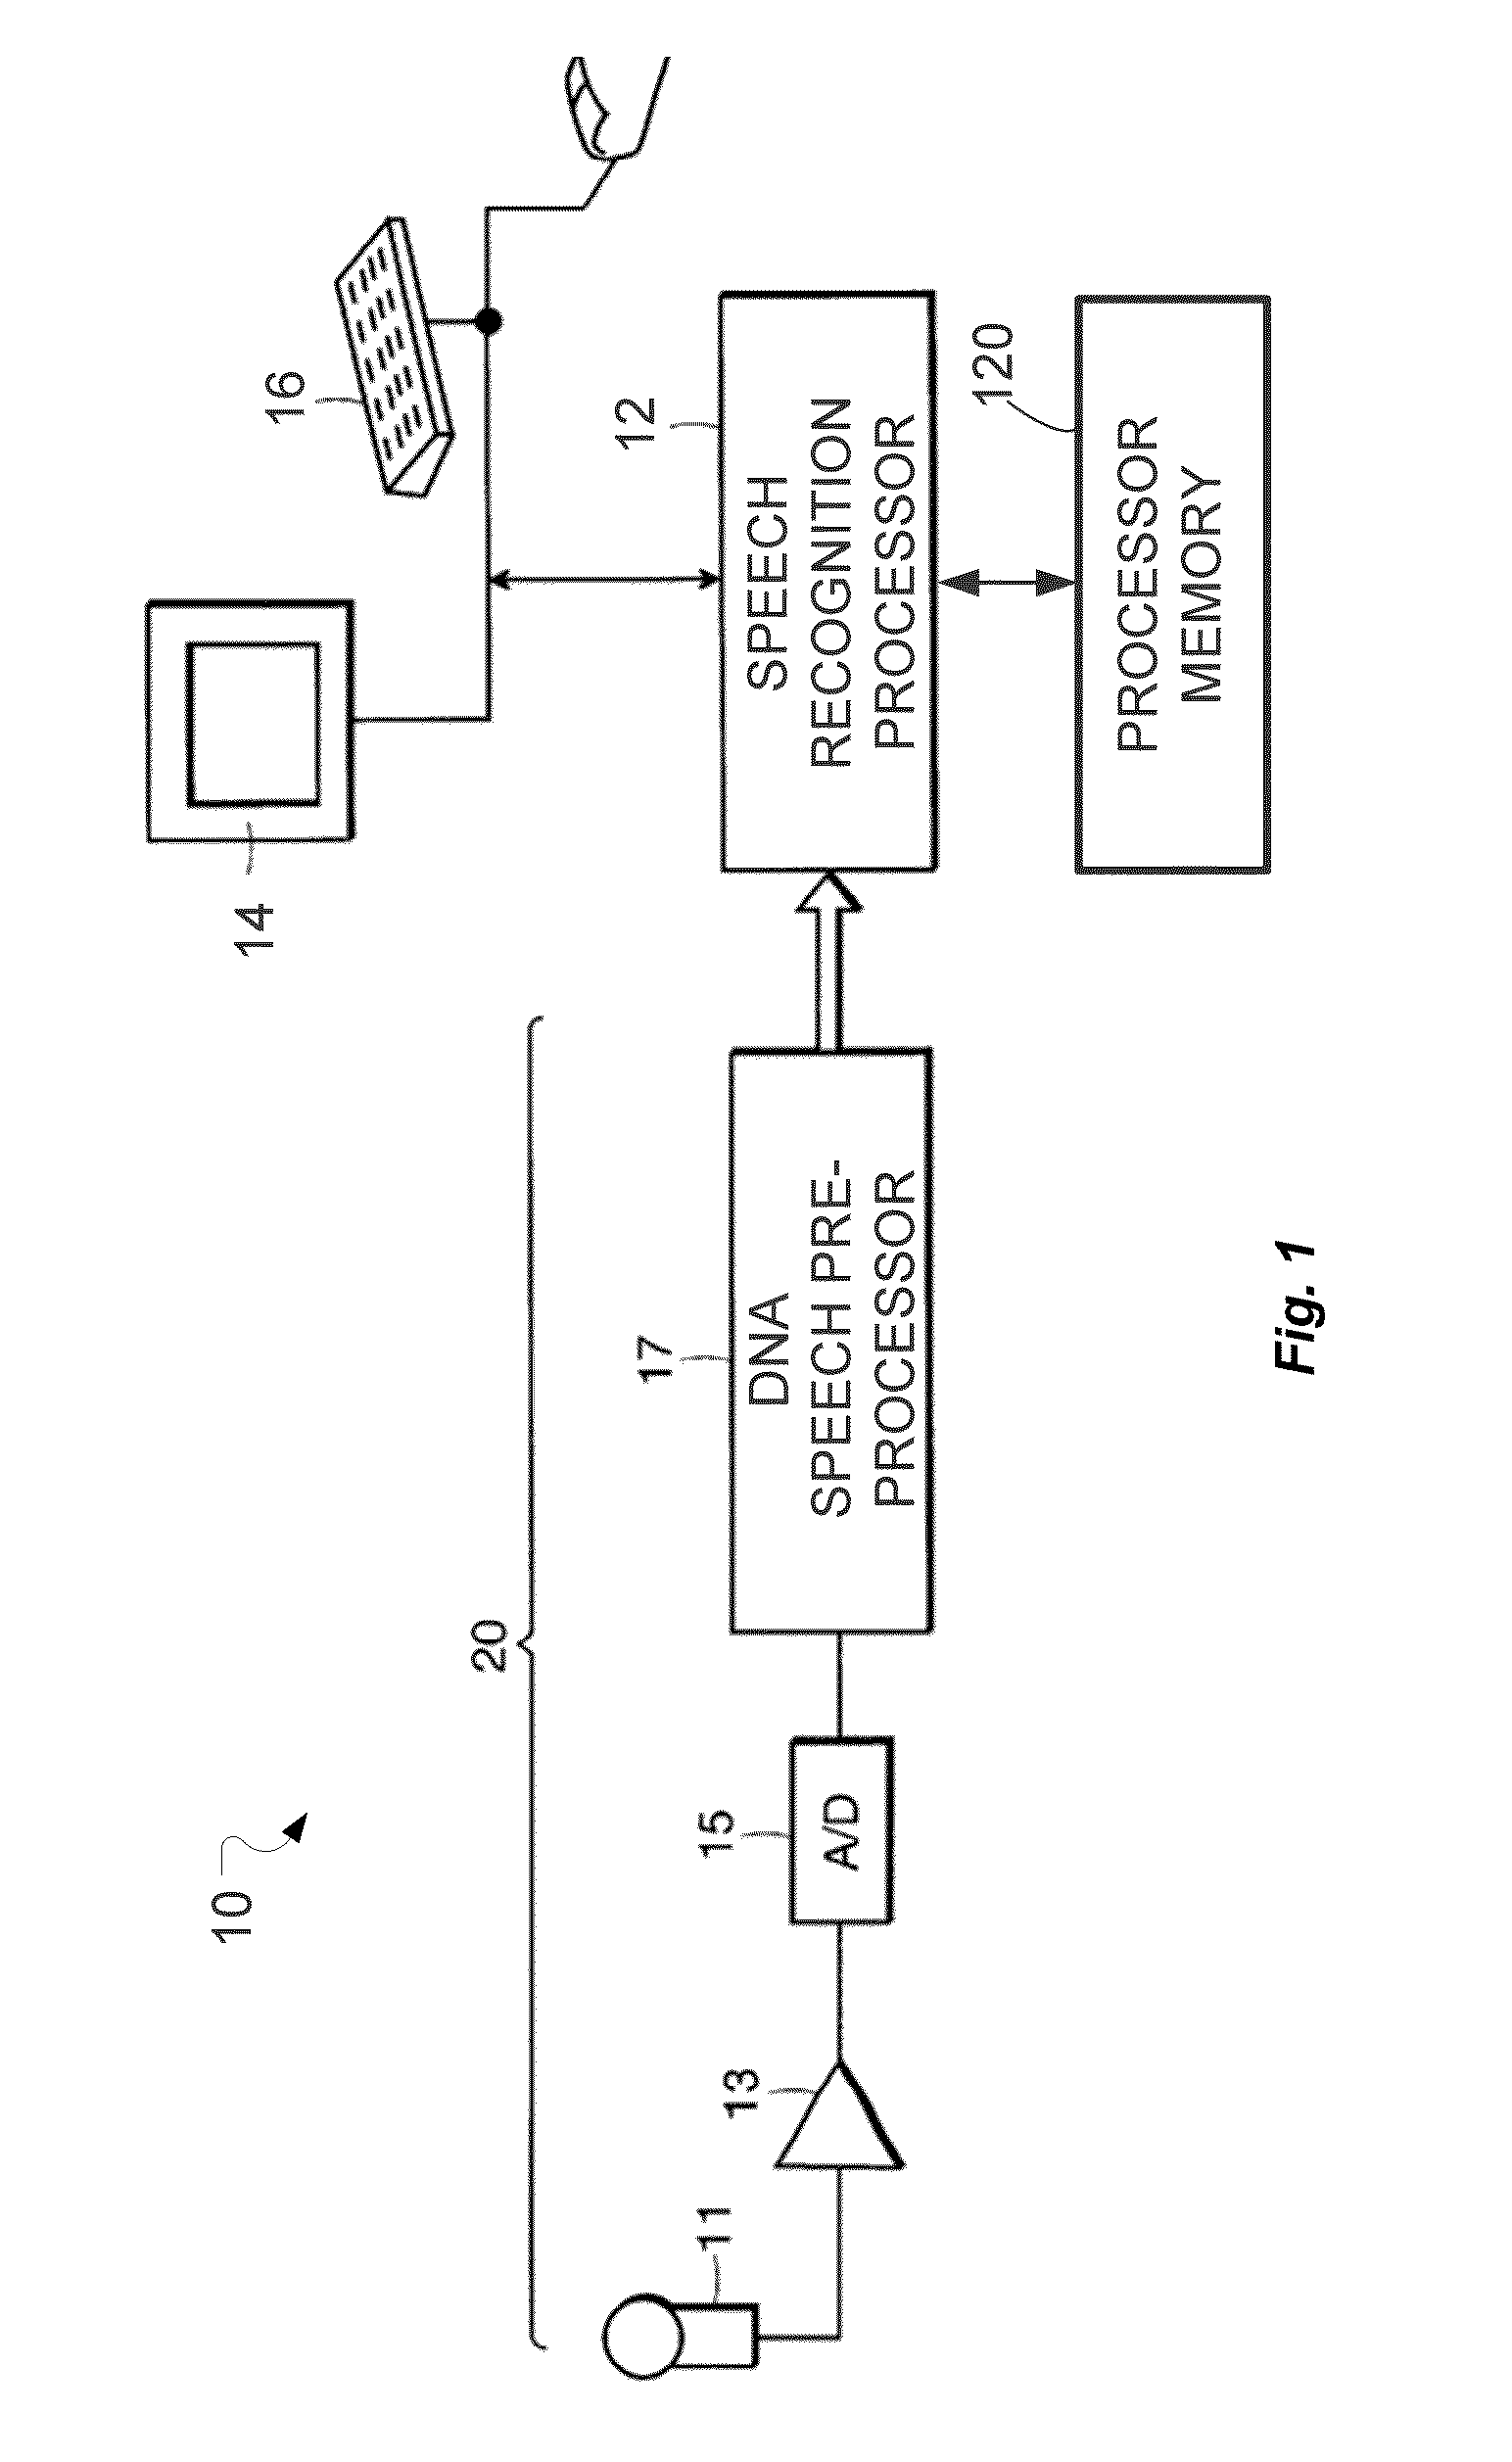 System and Method for Dynamic Noise Adaptation for Robust Automatic Speech Recognition